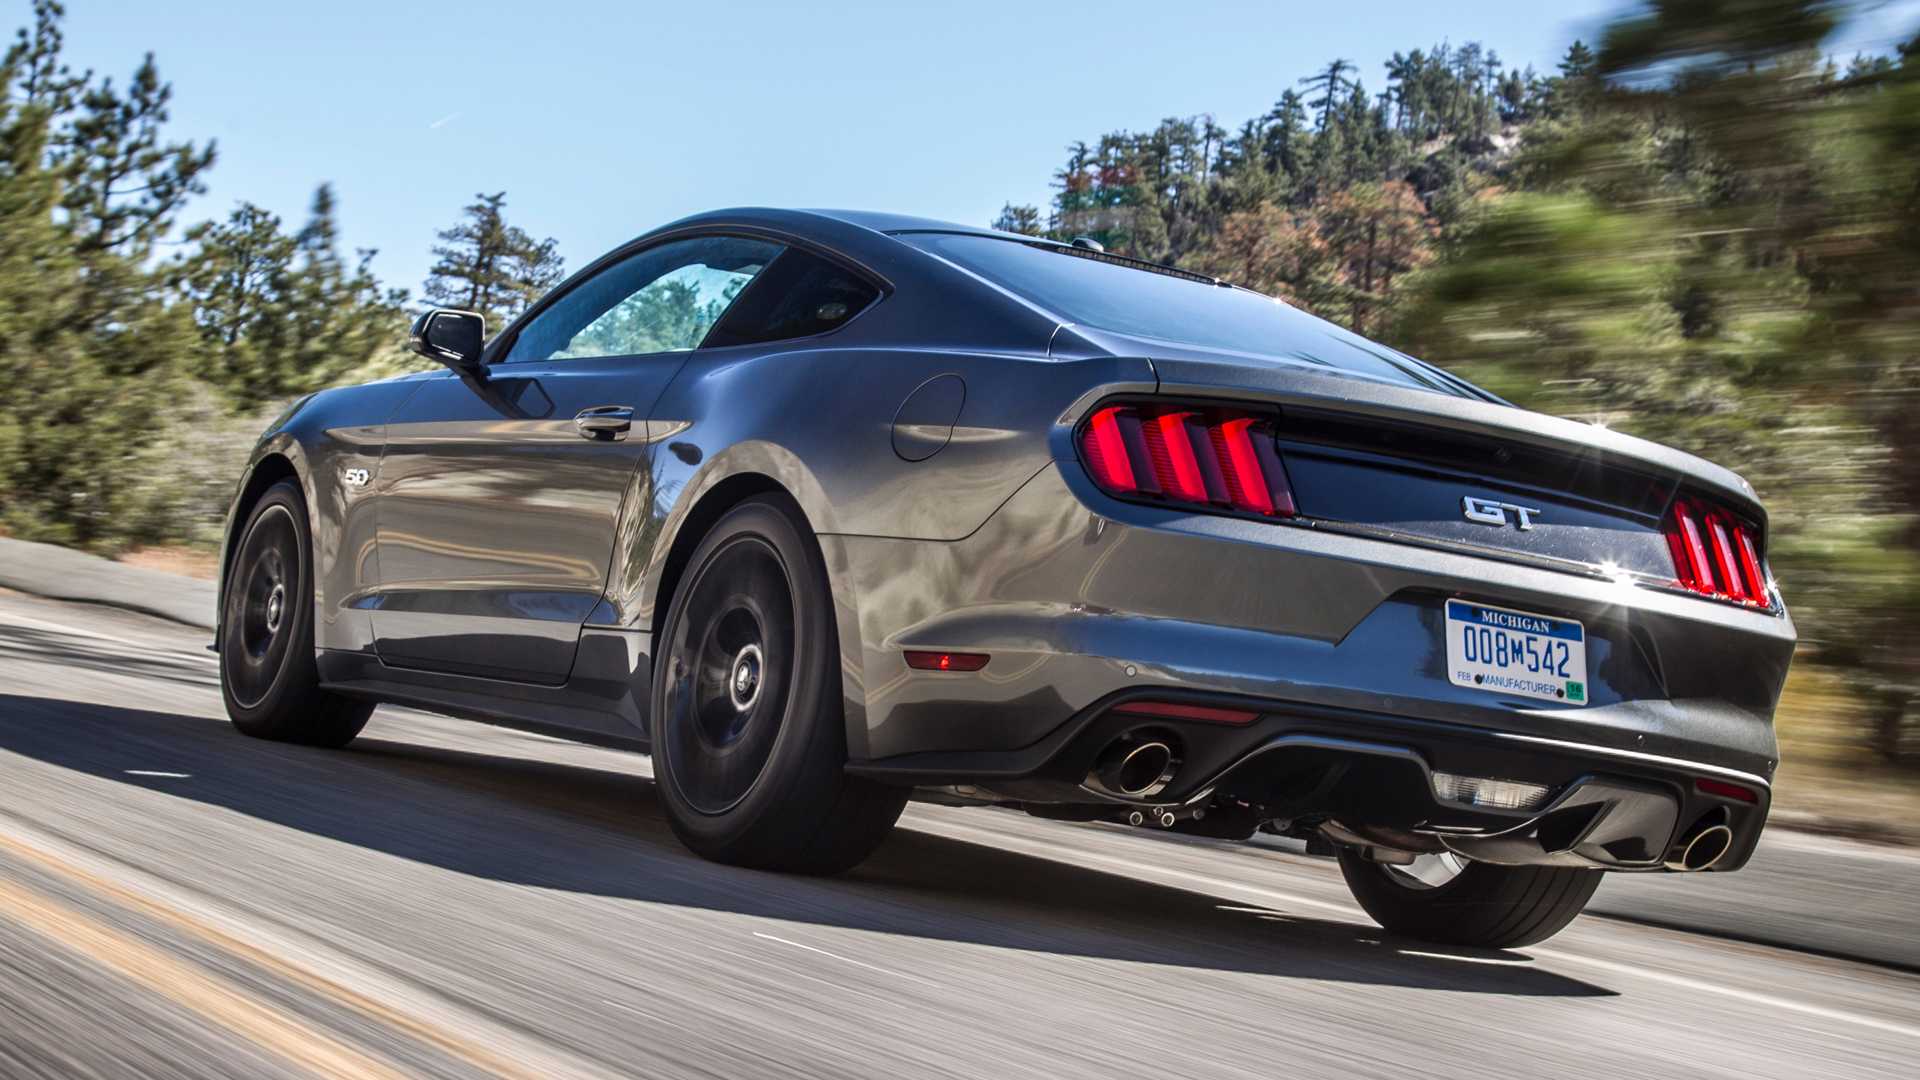 Cool Ford Mustang Gt Wallpaper Photos